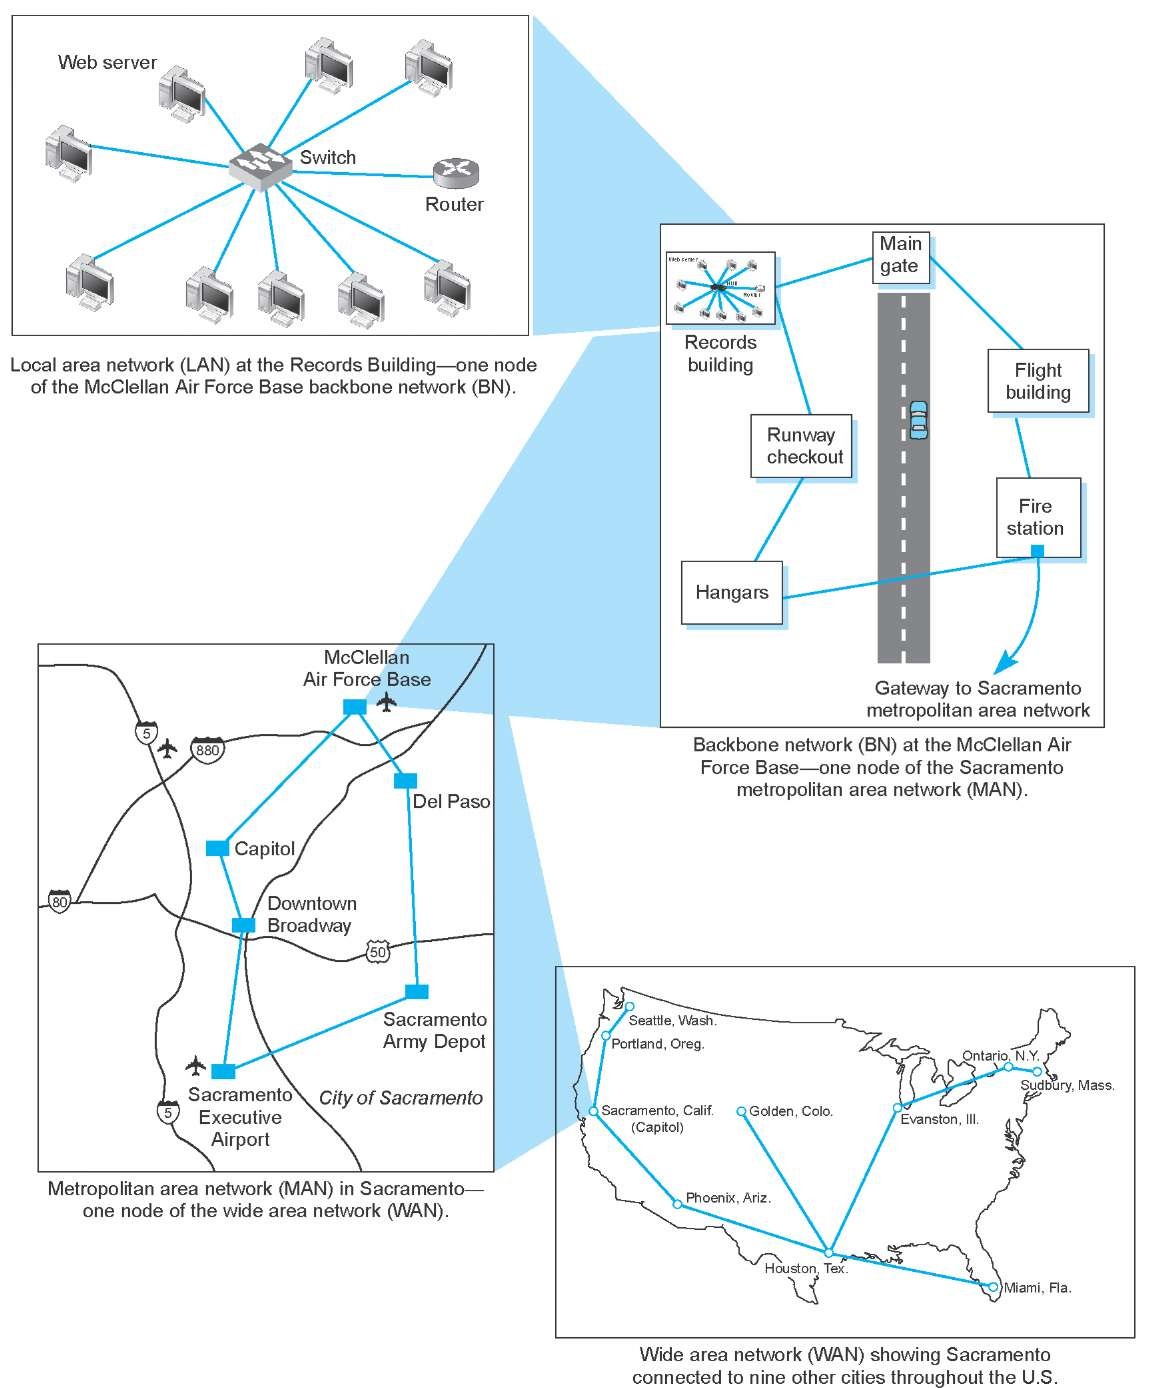 The hierarchical relationship of a local area network (LAN) to a backbone network (BN) to a metropolitan area network (MAN) to a wide area network (WAN) 